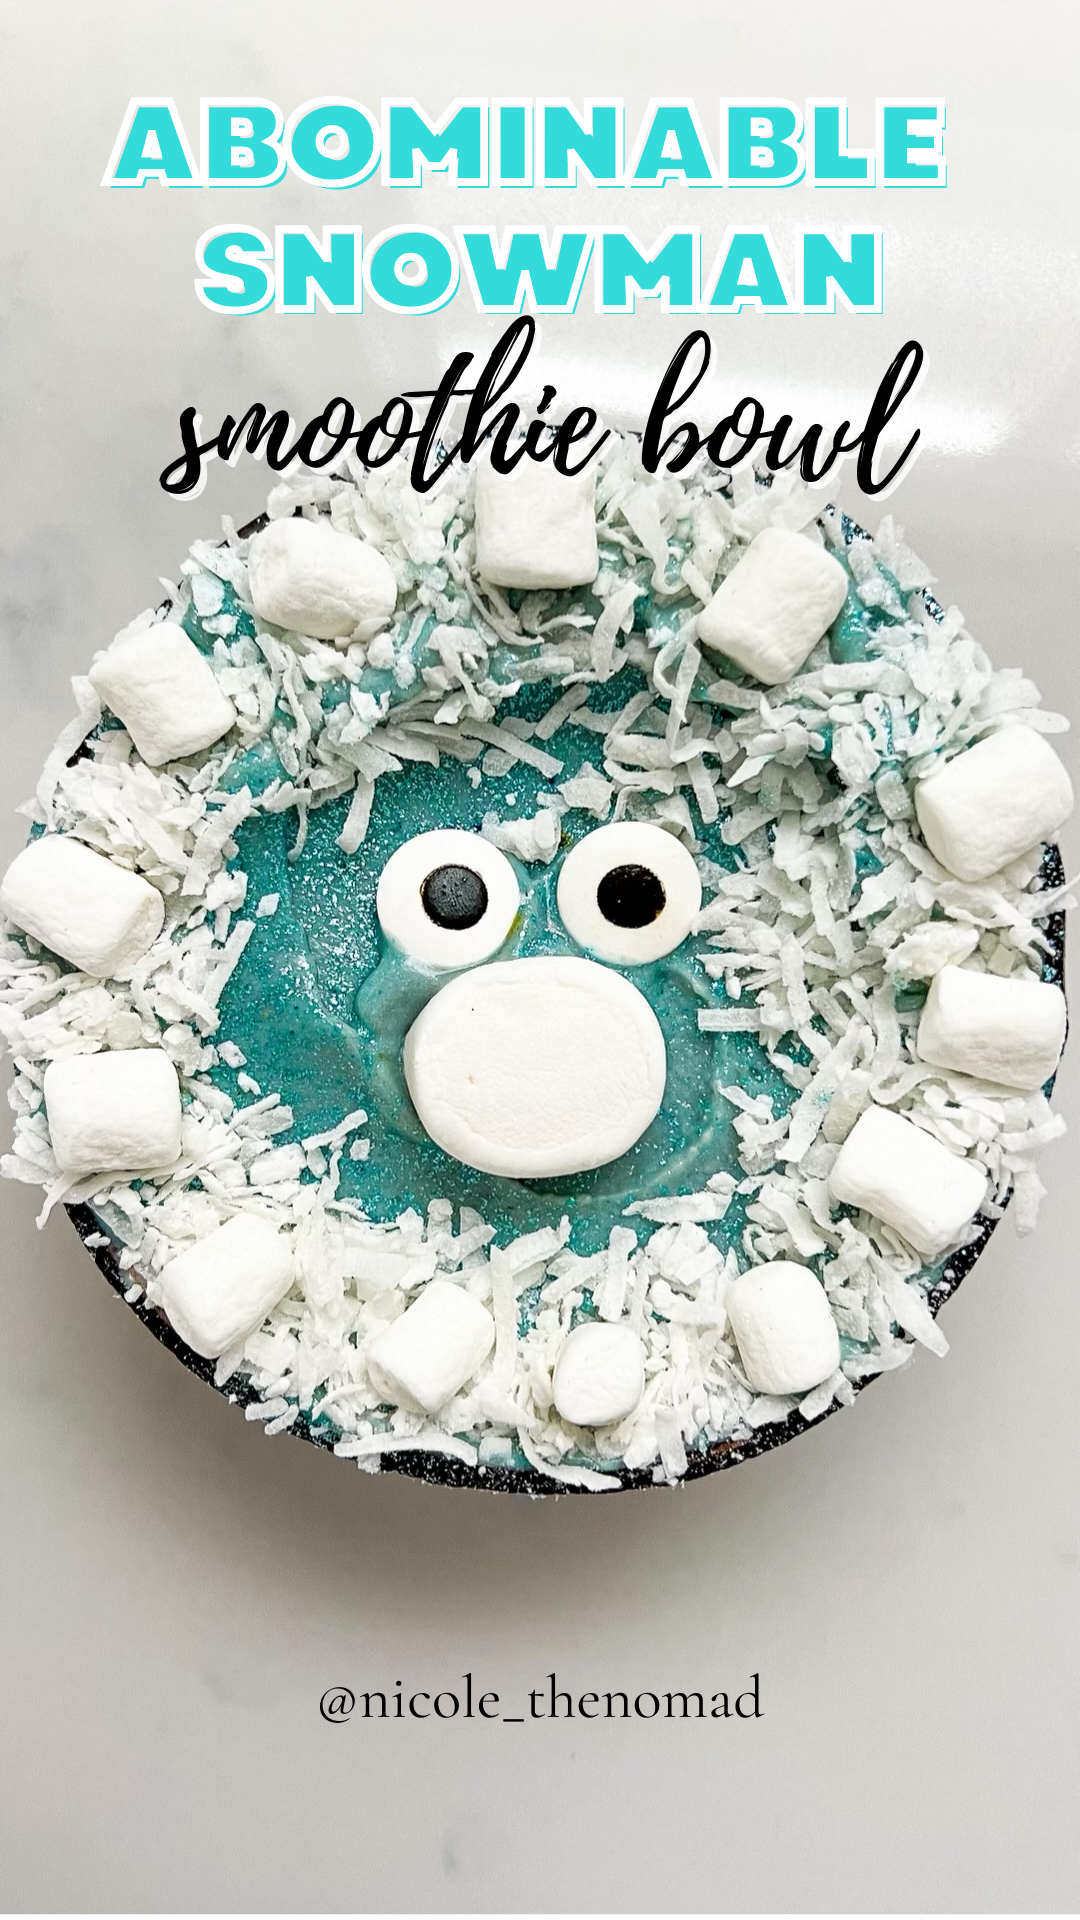 Abominable Snowman Smoothie Bowl